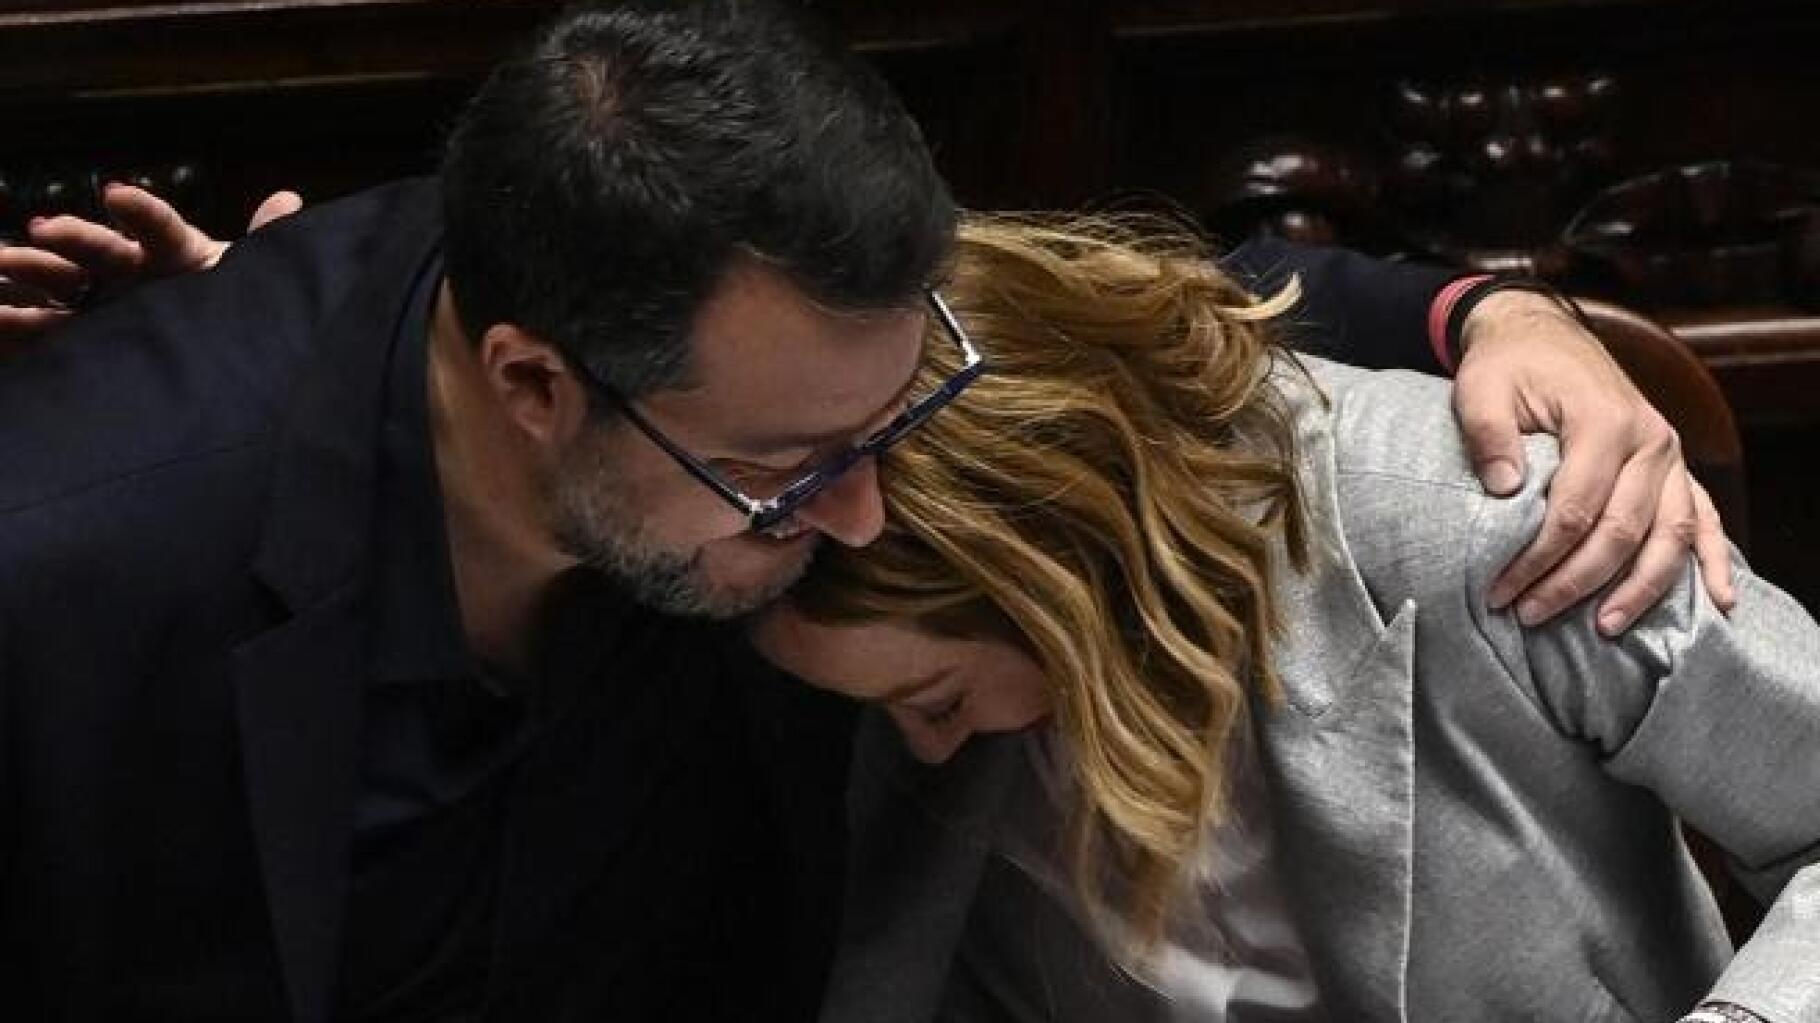 In Italy, Meloni and Salvini embraced and made a surprise appearance in parliament amid a tense episode.